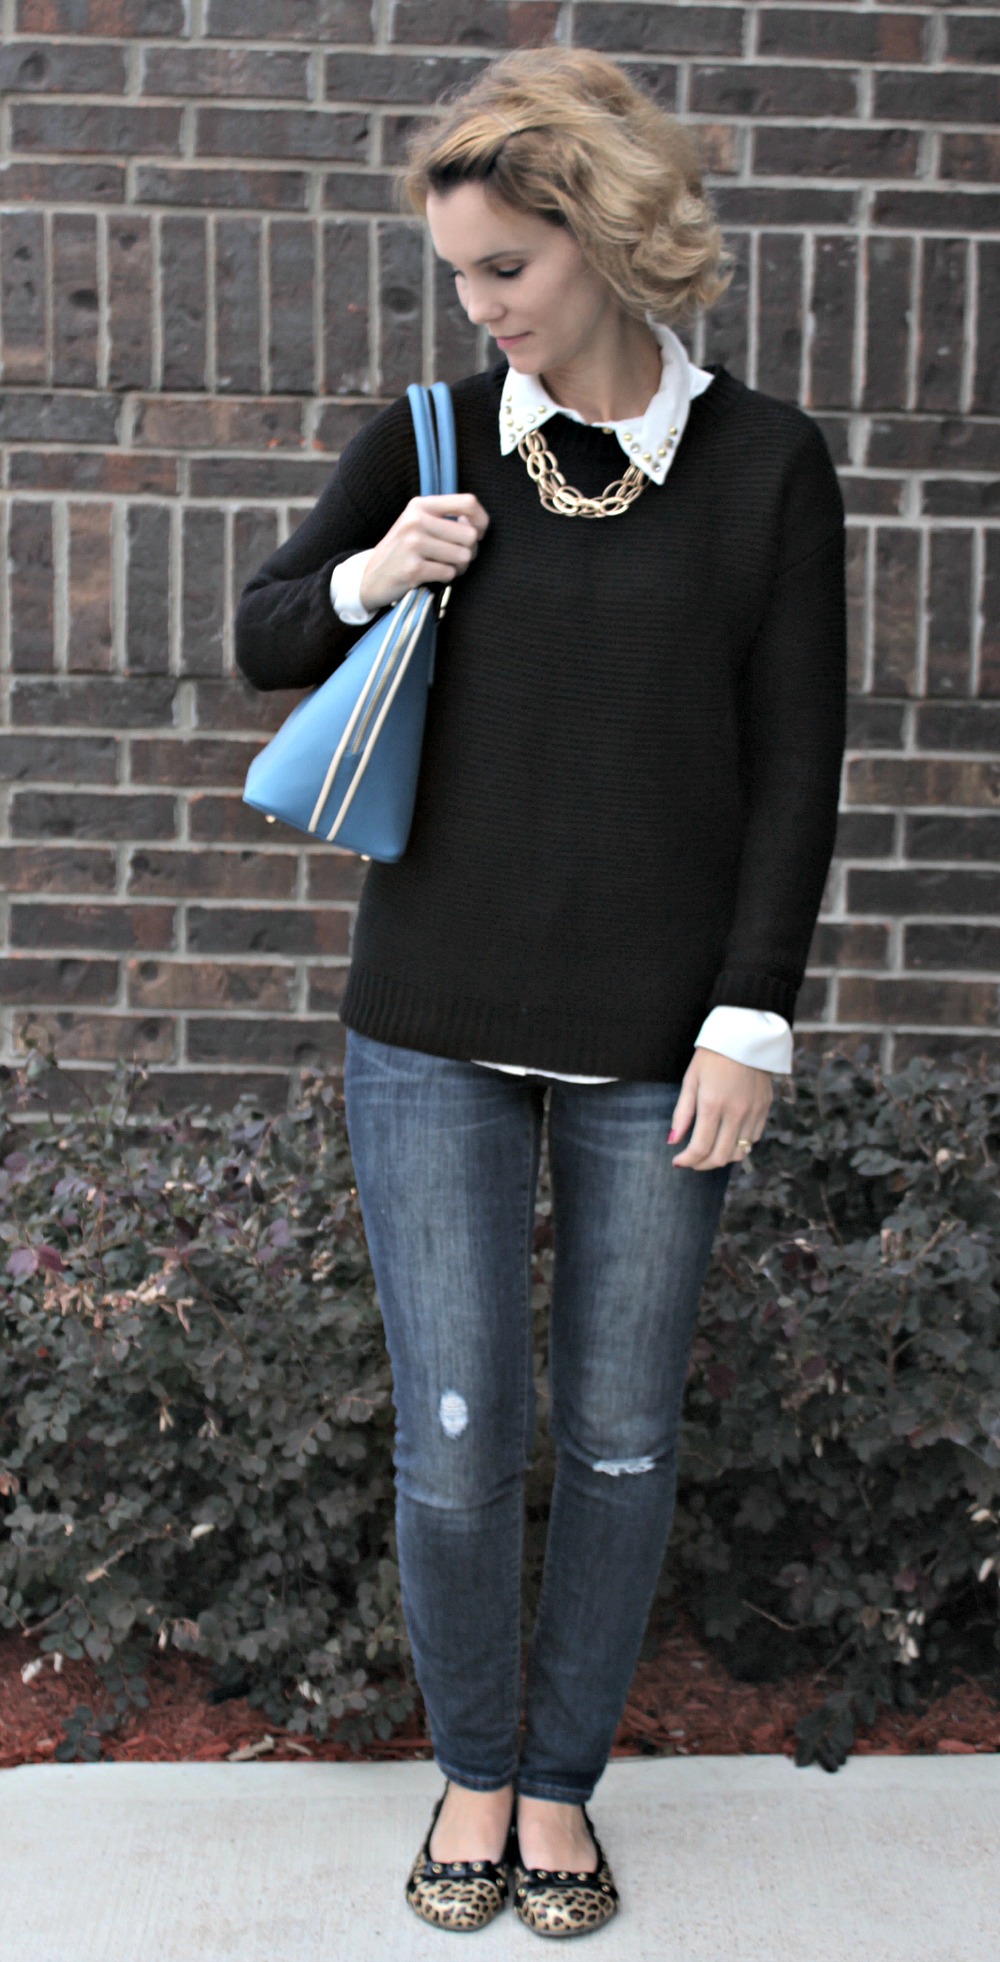 Cute Outfit Ideas  My Favorite Way to Wear a Sweater